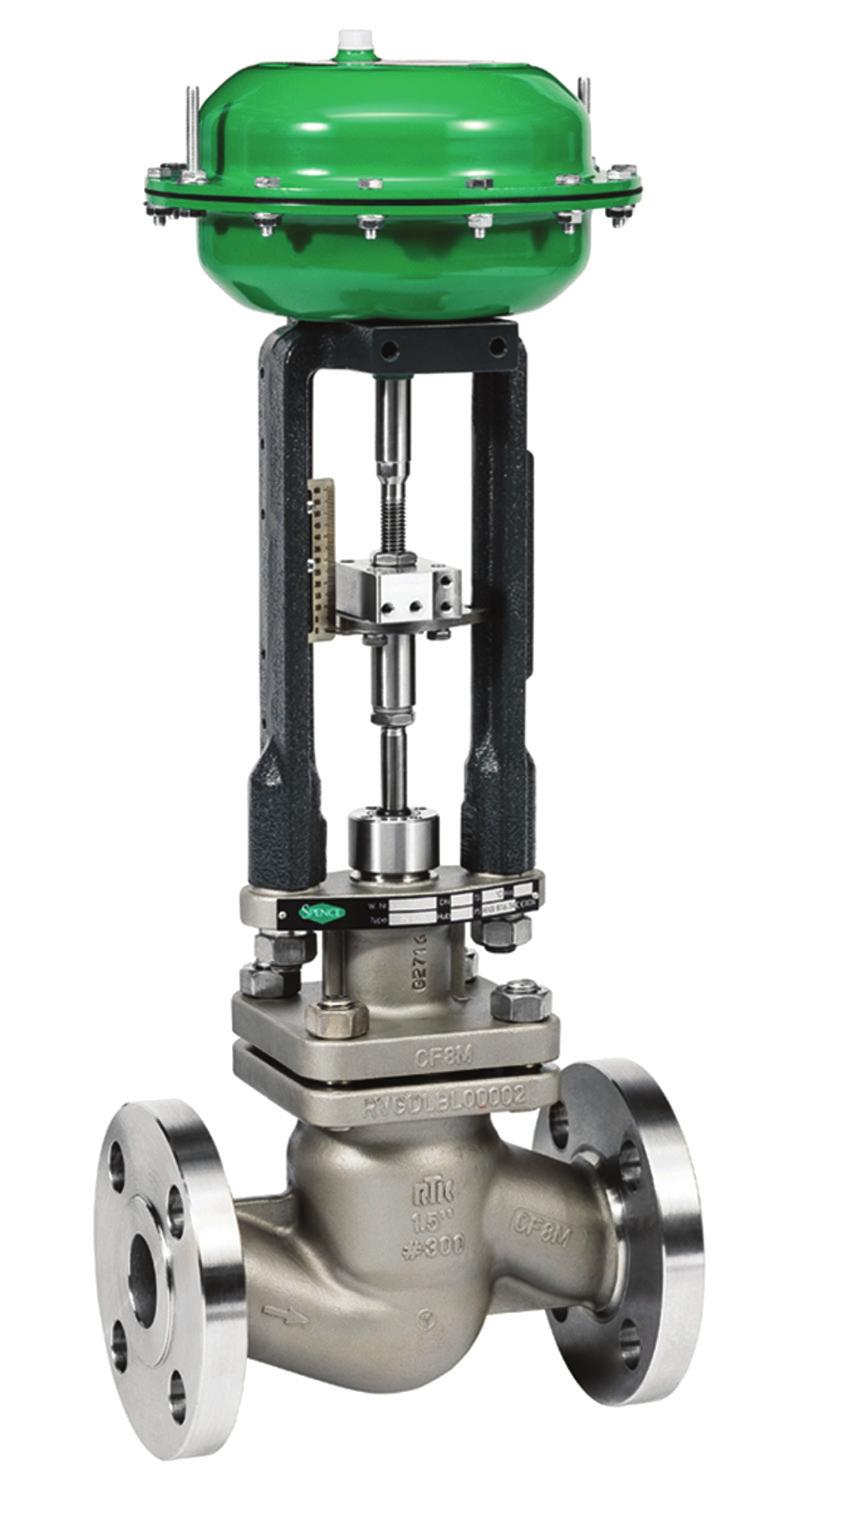 REflex Product Information BROADEST RANGE IN THE INDUSTRY The REflex line of two and three way valves offers more possibilities than any other valve family in the Industry.